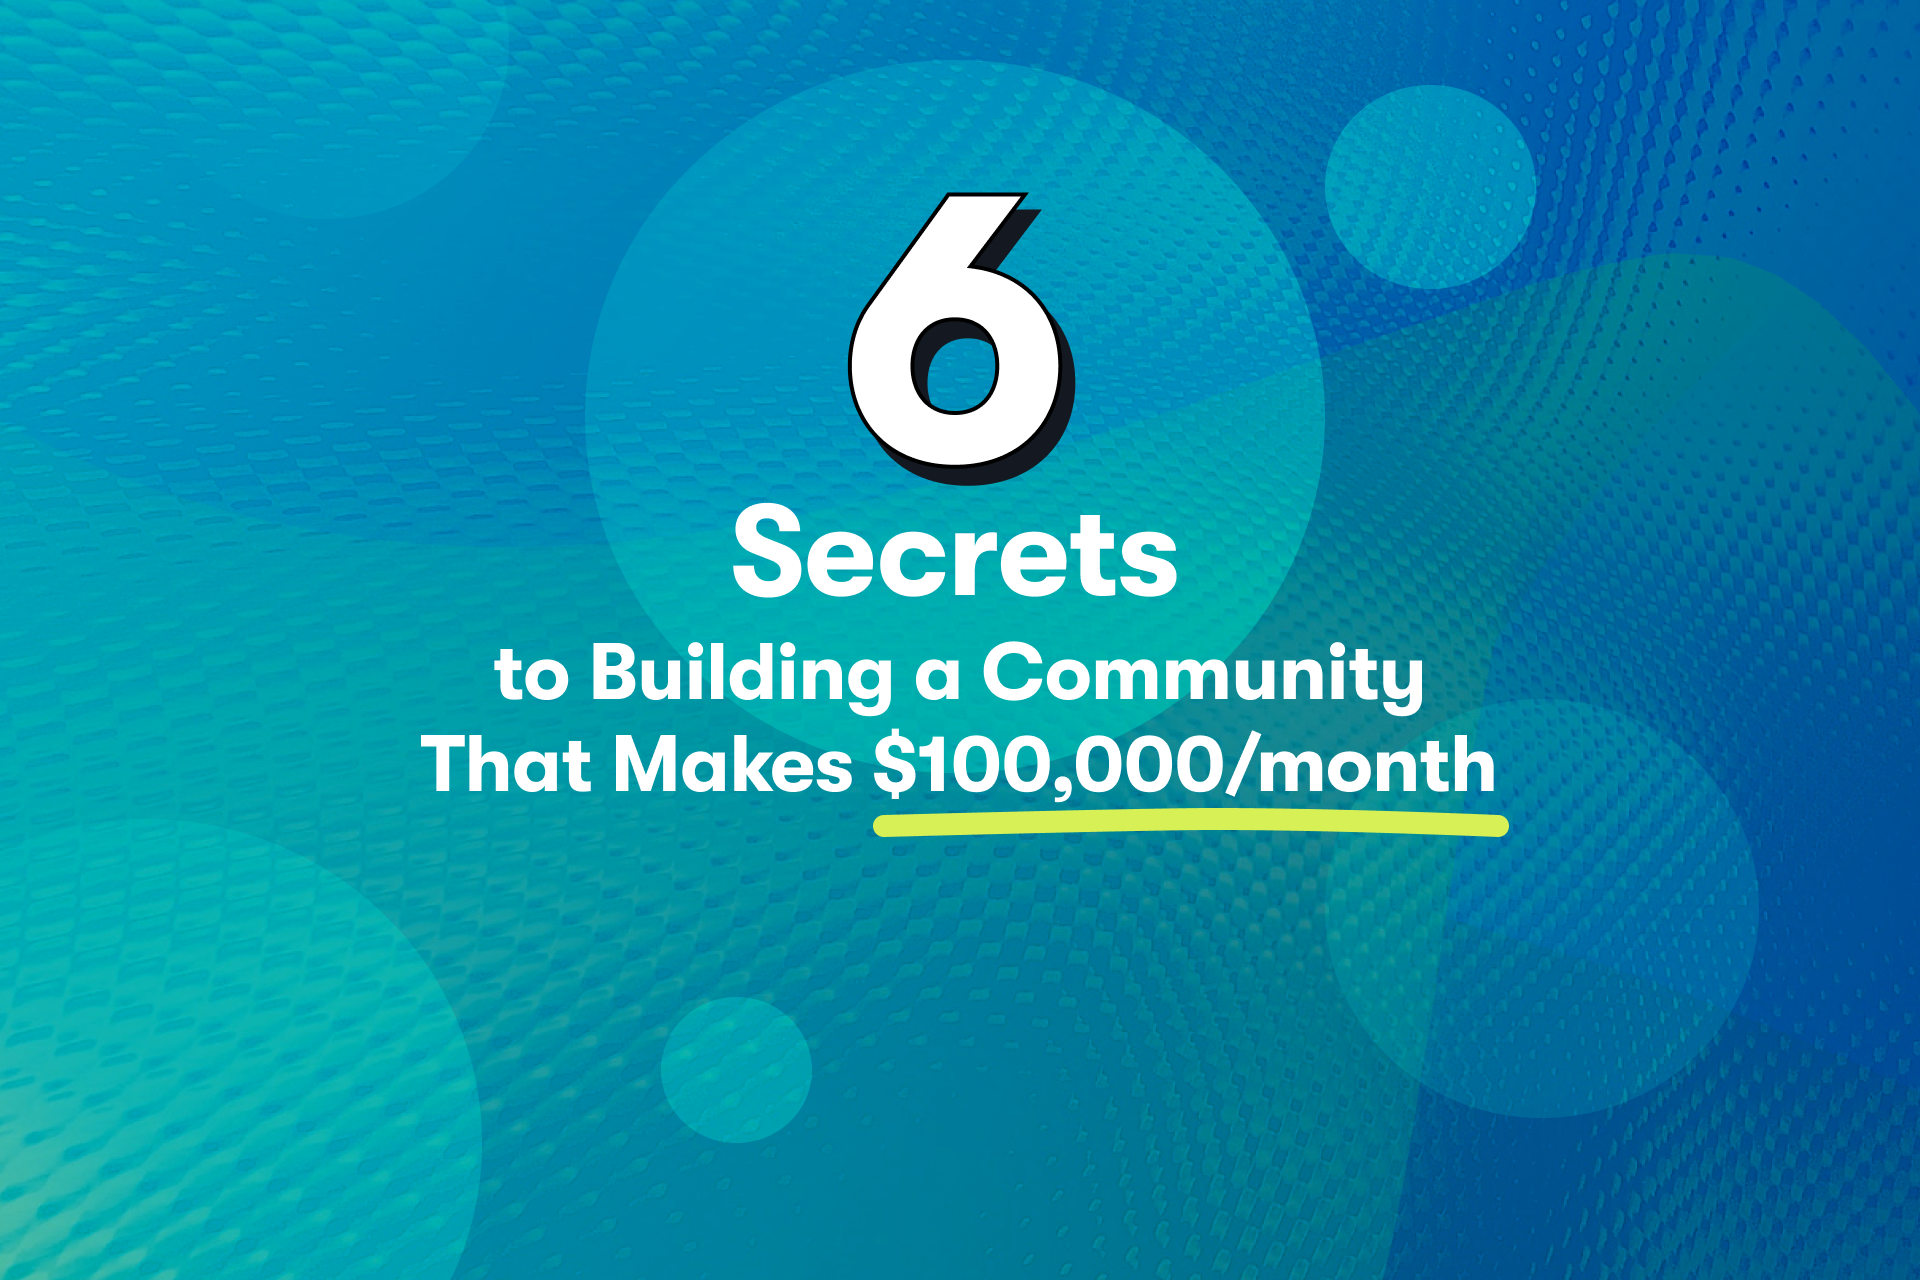 How to Build a Paid Community (6 Secrets for $100,000/Mo) Mighty Pro